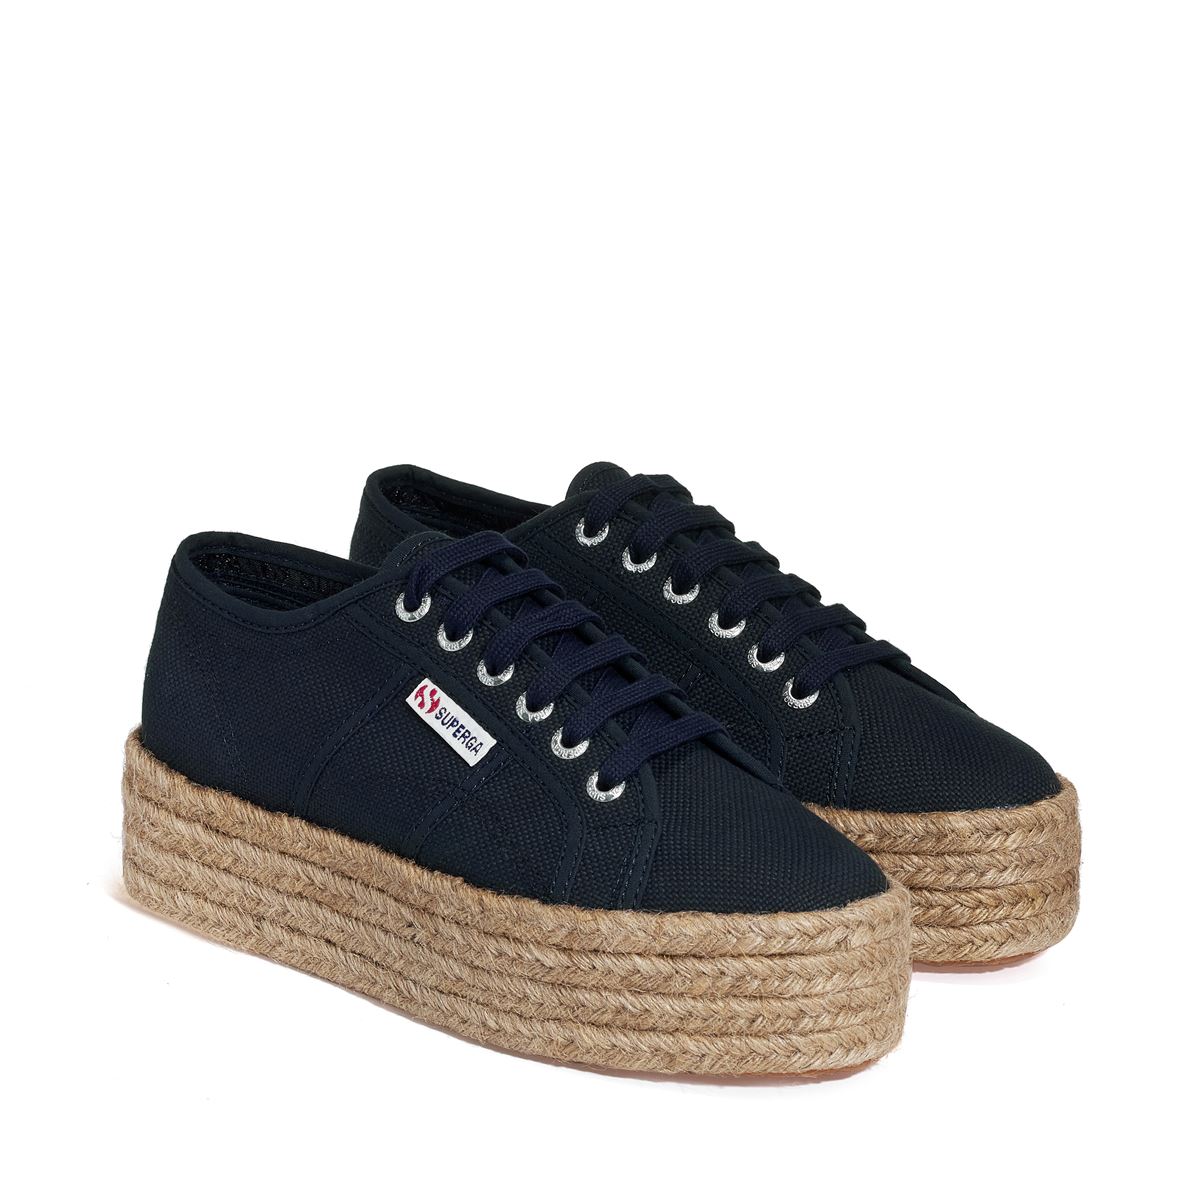 2790 Cotropew Sneakers Navy- Hover Image